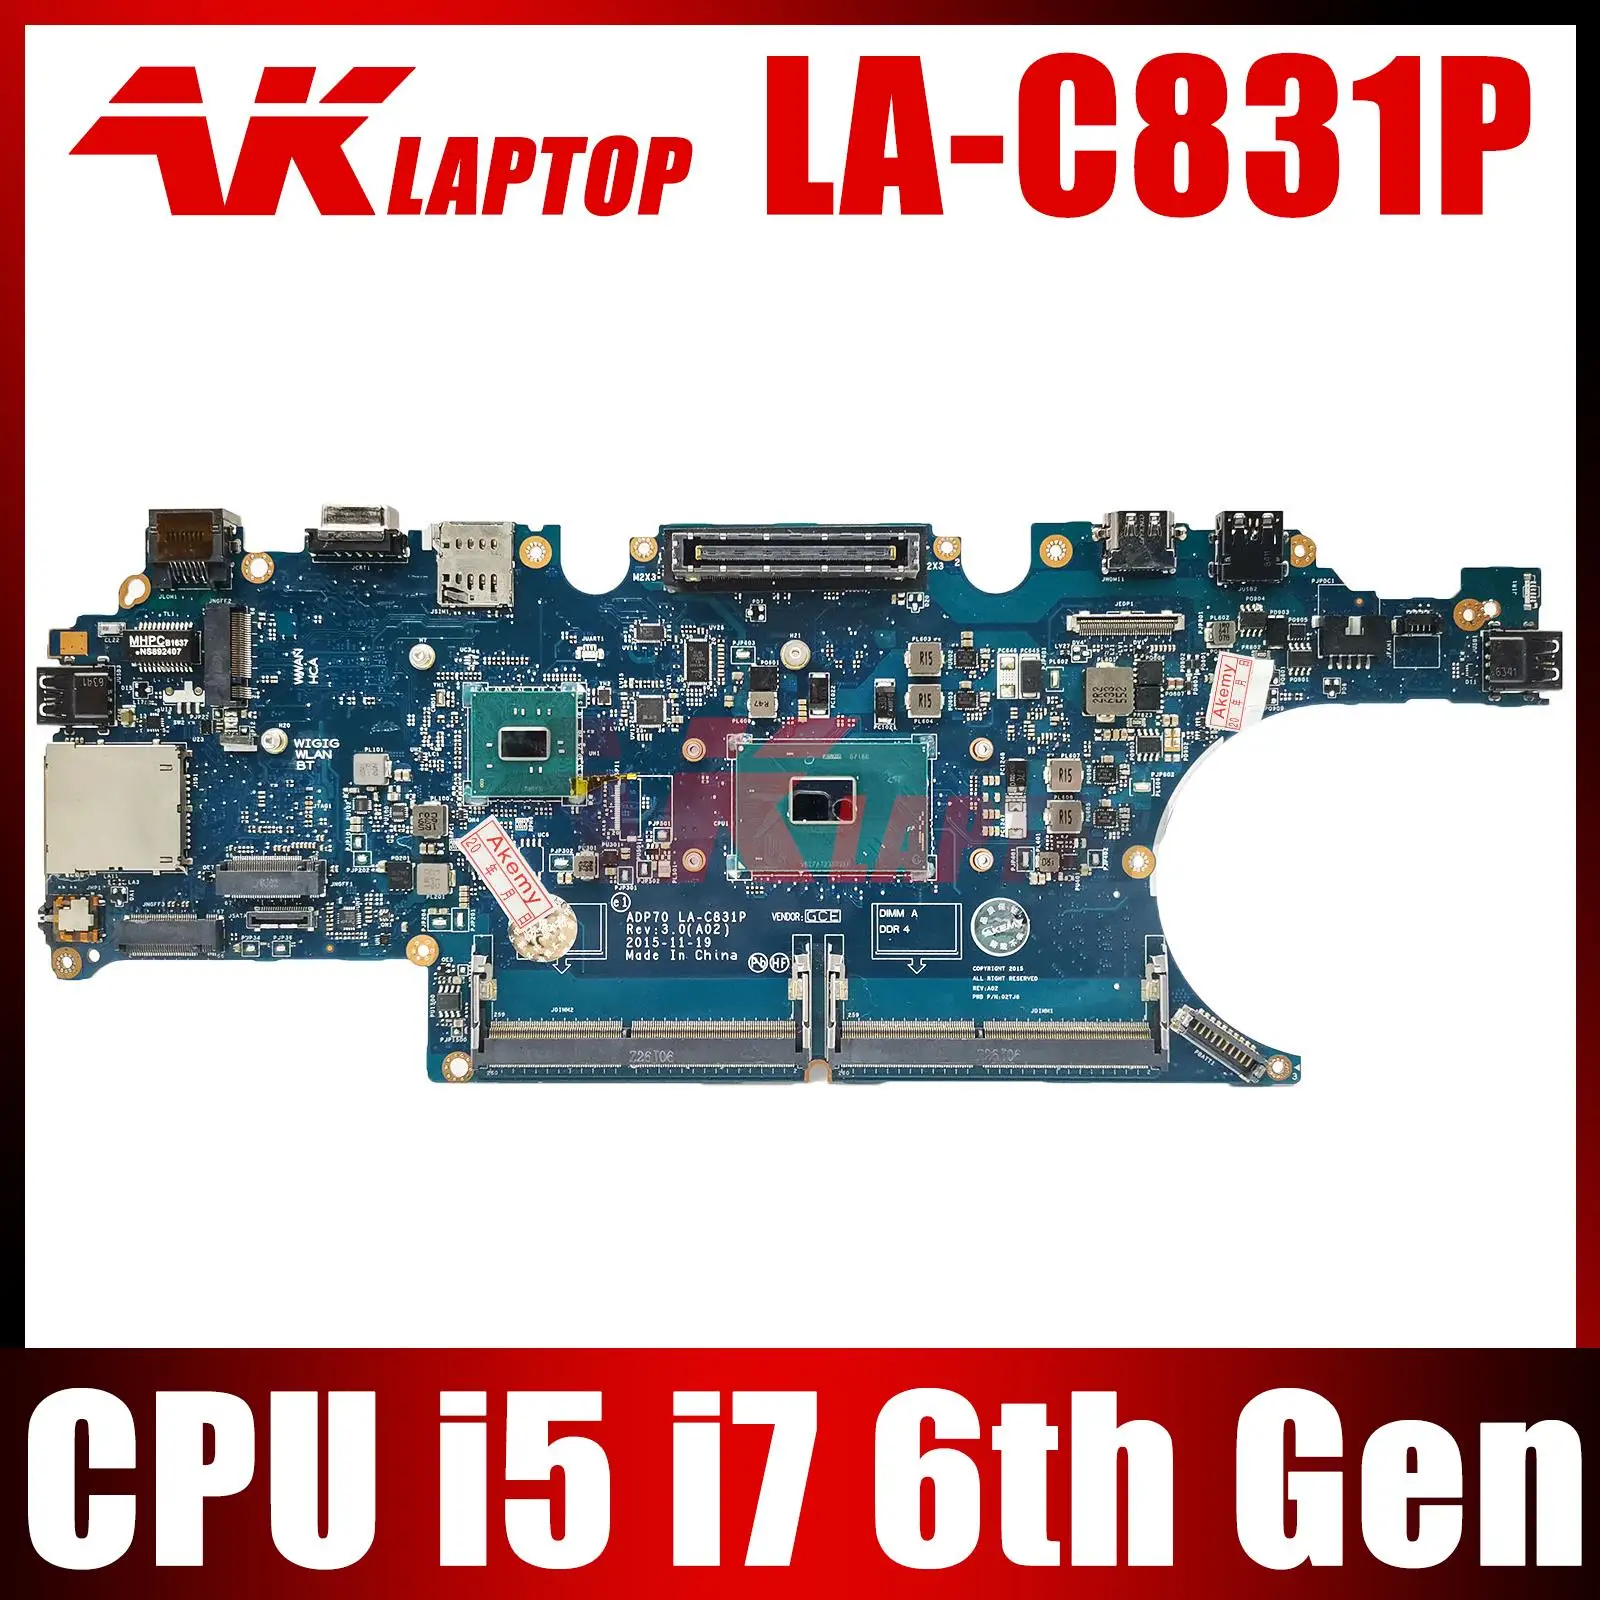 

CN-0476JC 0792TG 02MMKG Mainboard For Dell Latitude E5470 LA-C831P Laptop Motherboard DDR4L With I5 I7 6th Gen CPU 100% Fully